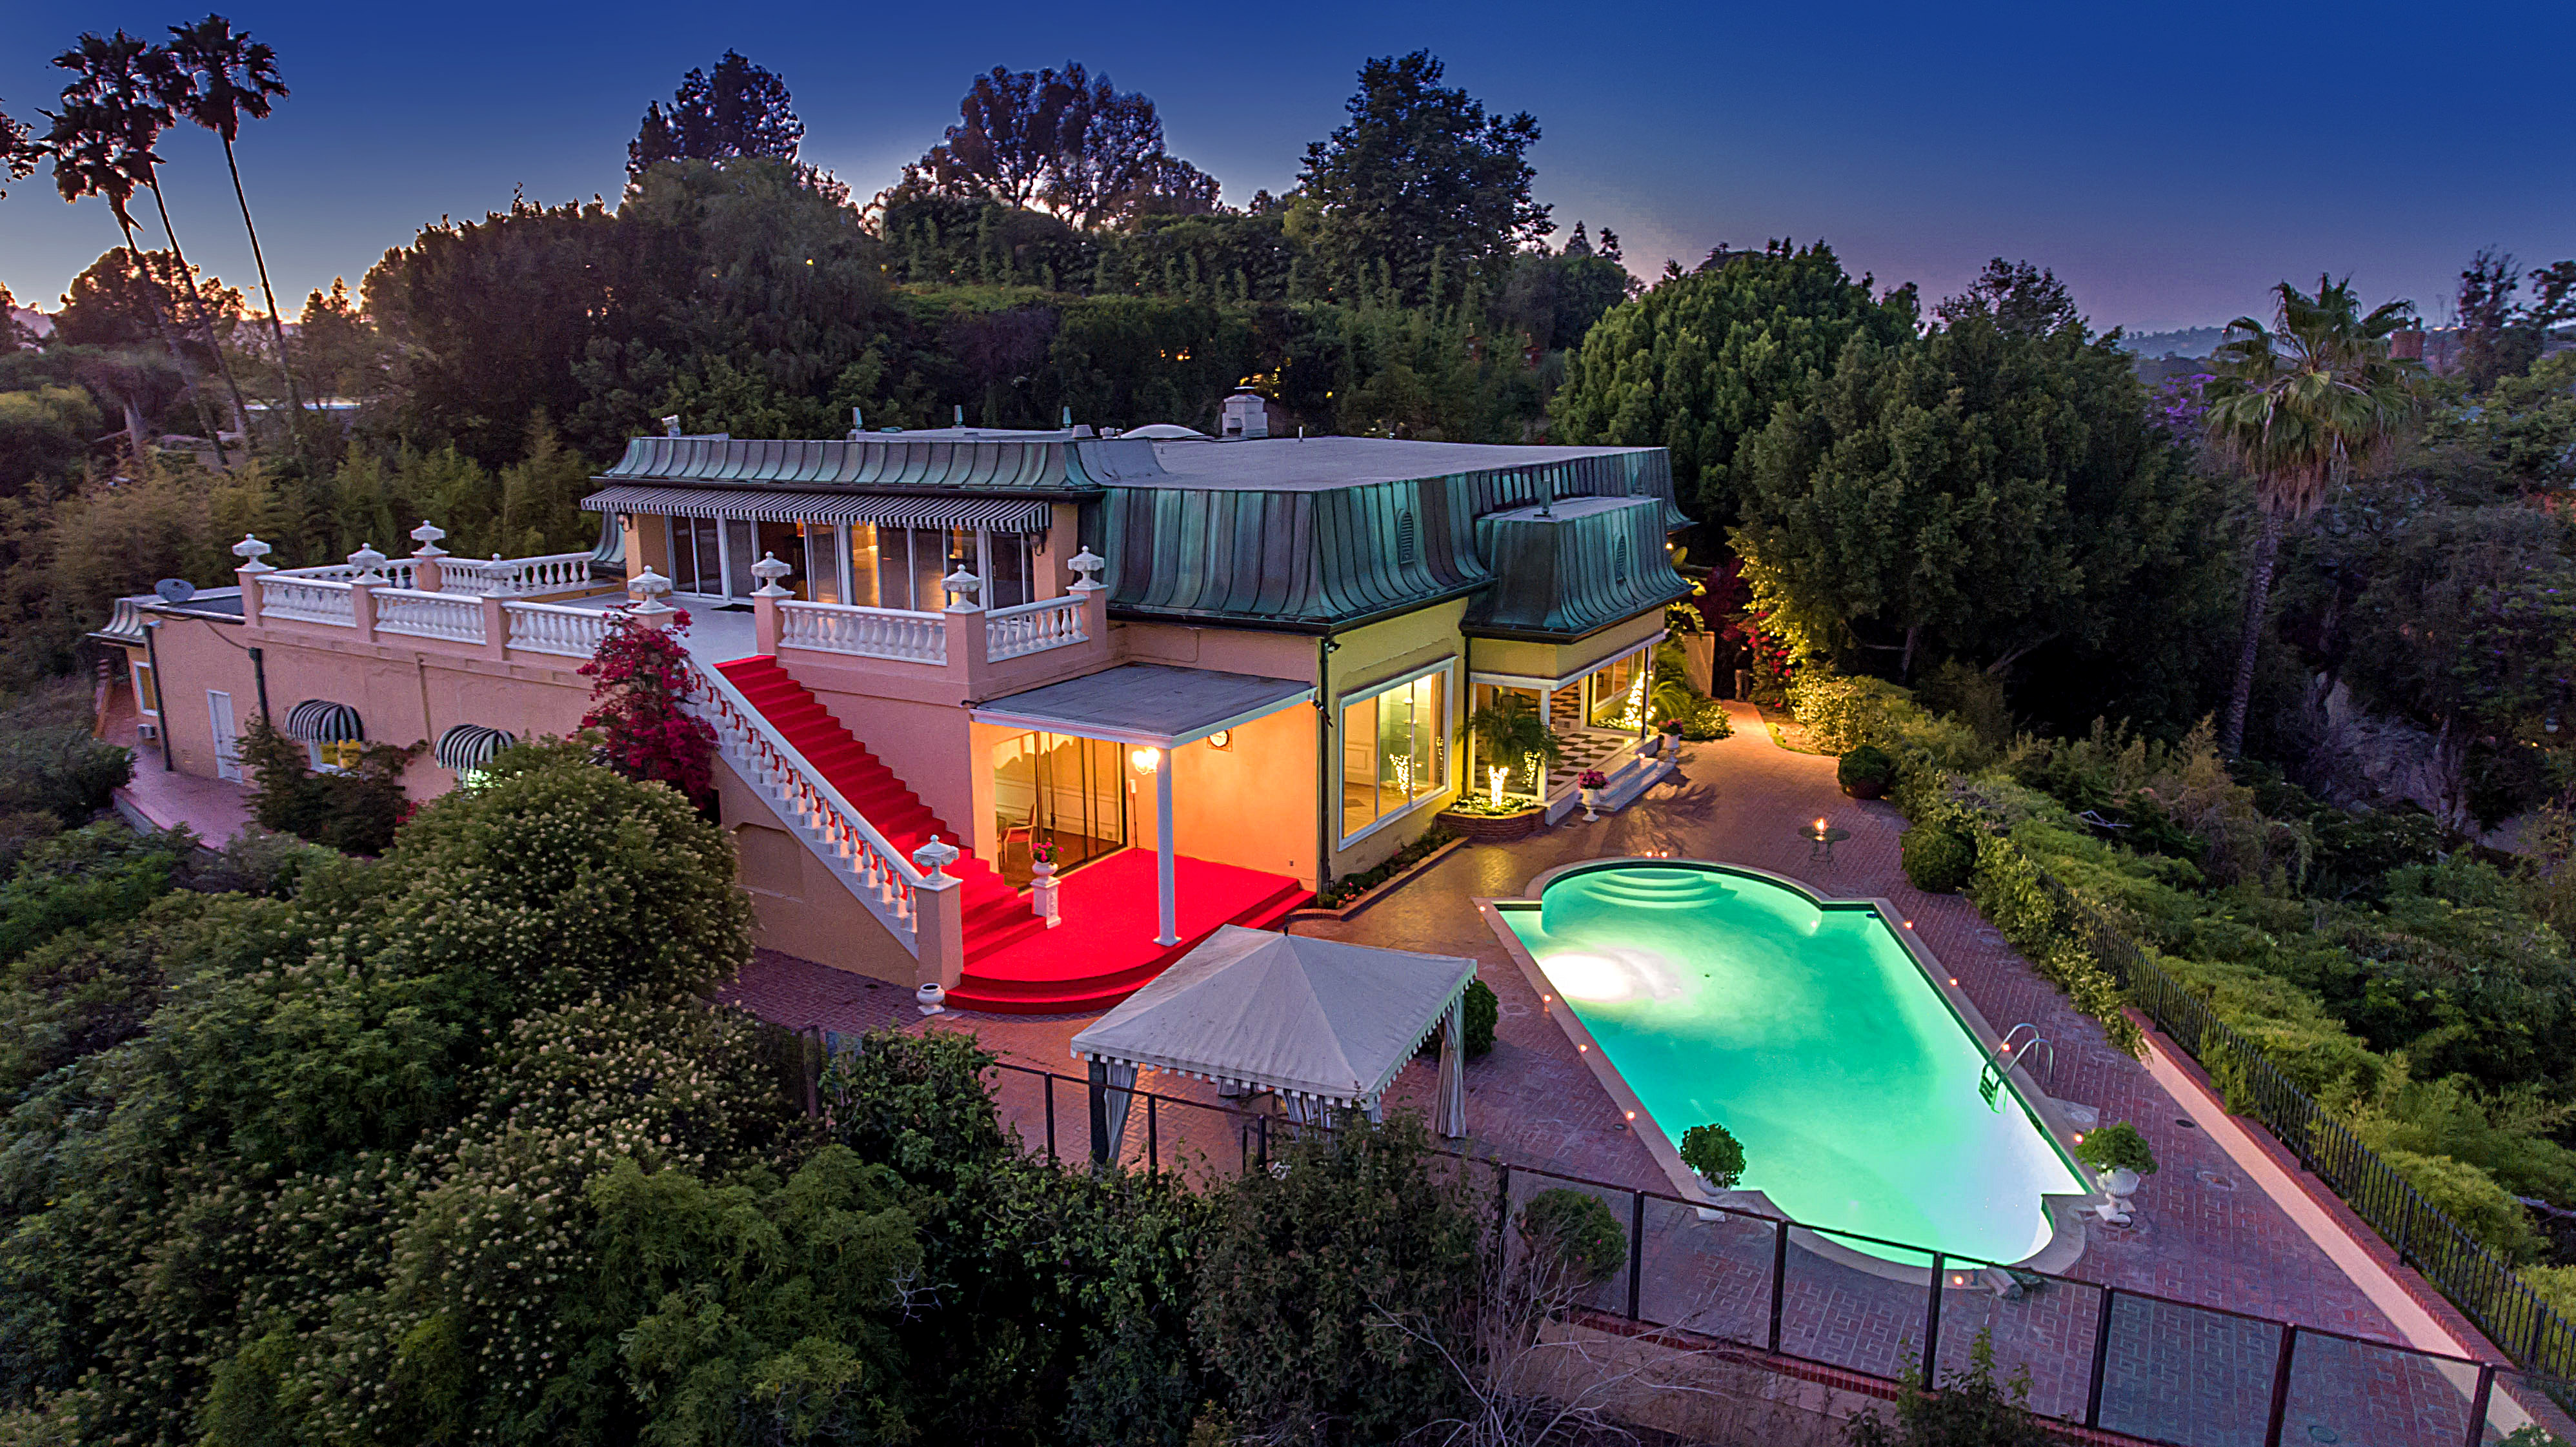 Zsa Zsa and Elvis lived here and so can you, for $23.45M